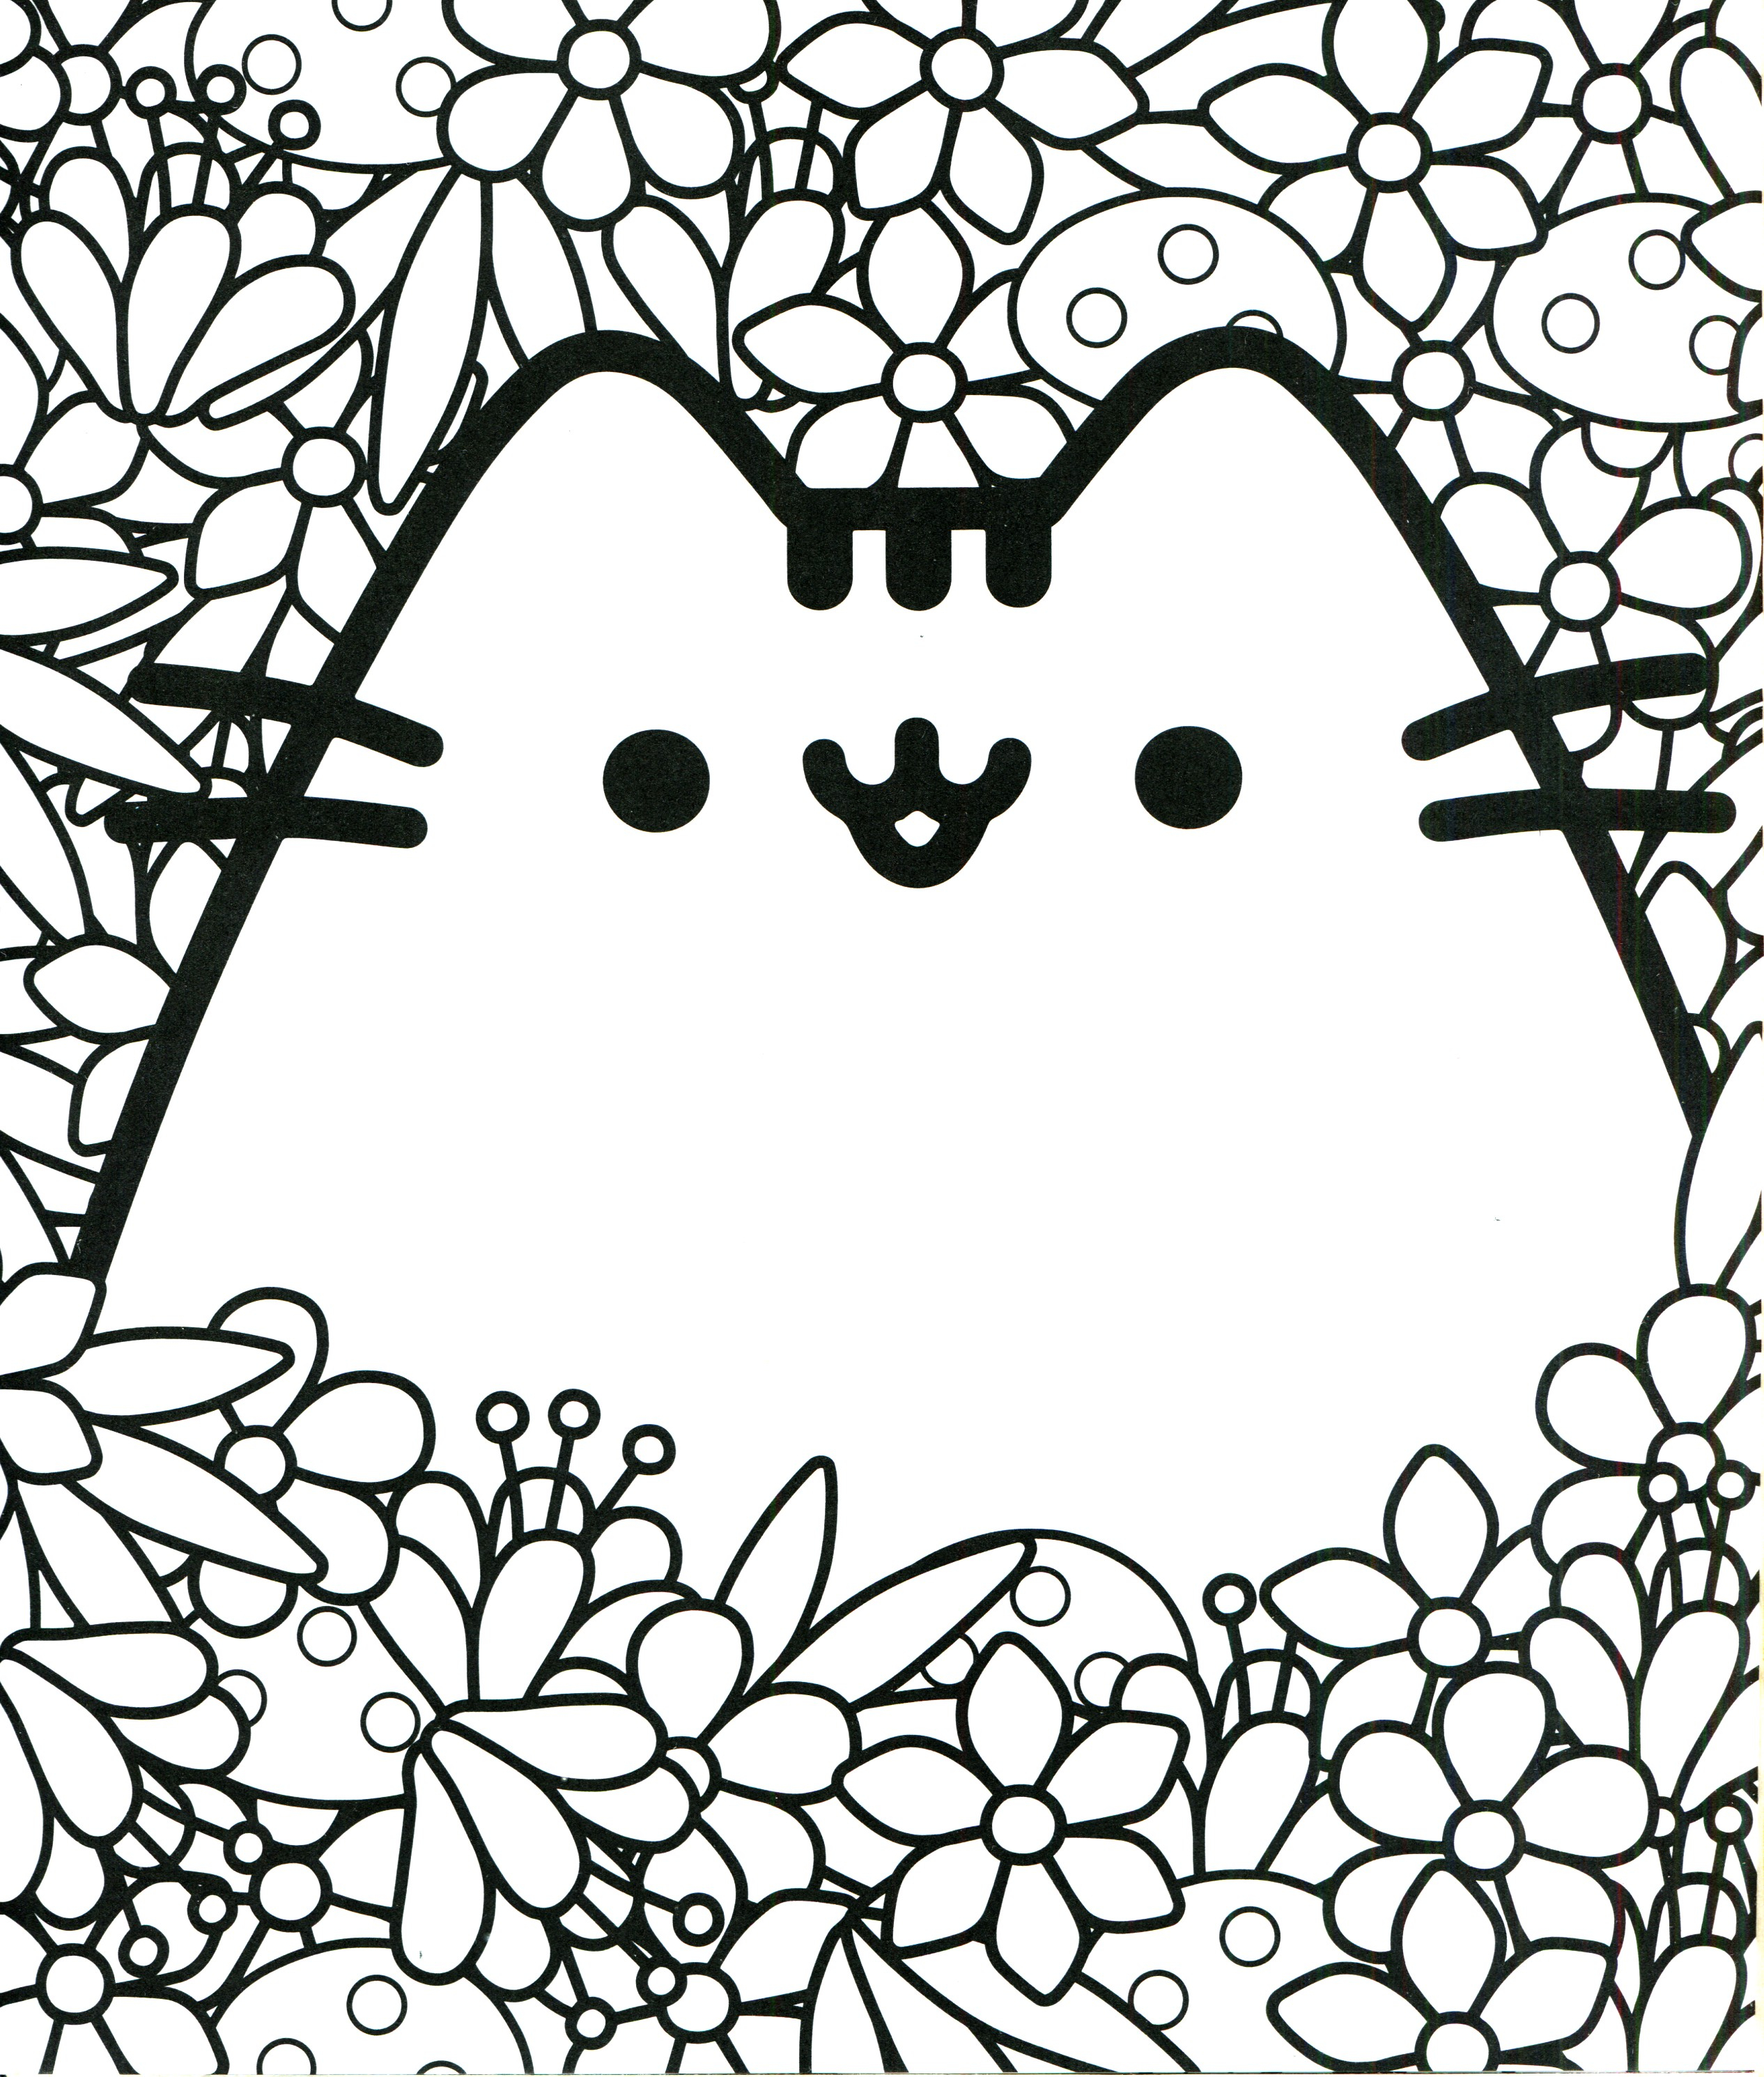 594 Simple Nyan Cat Coloring Pages for Kids